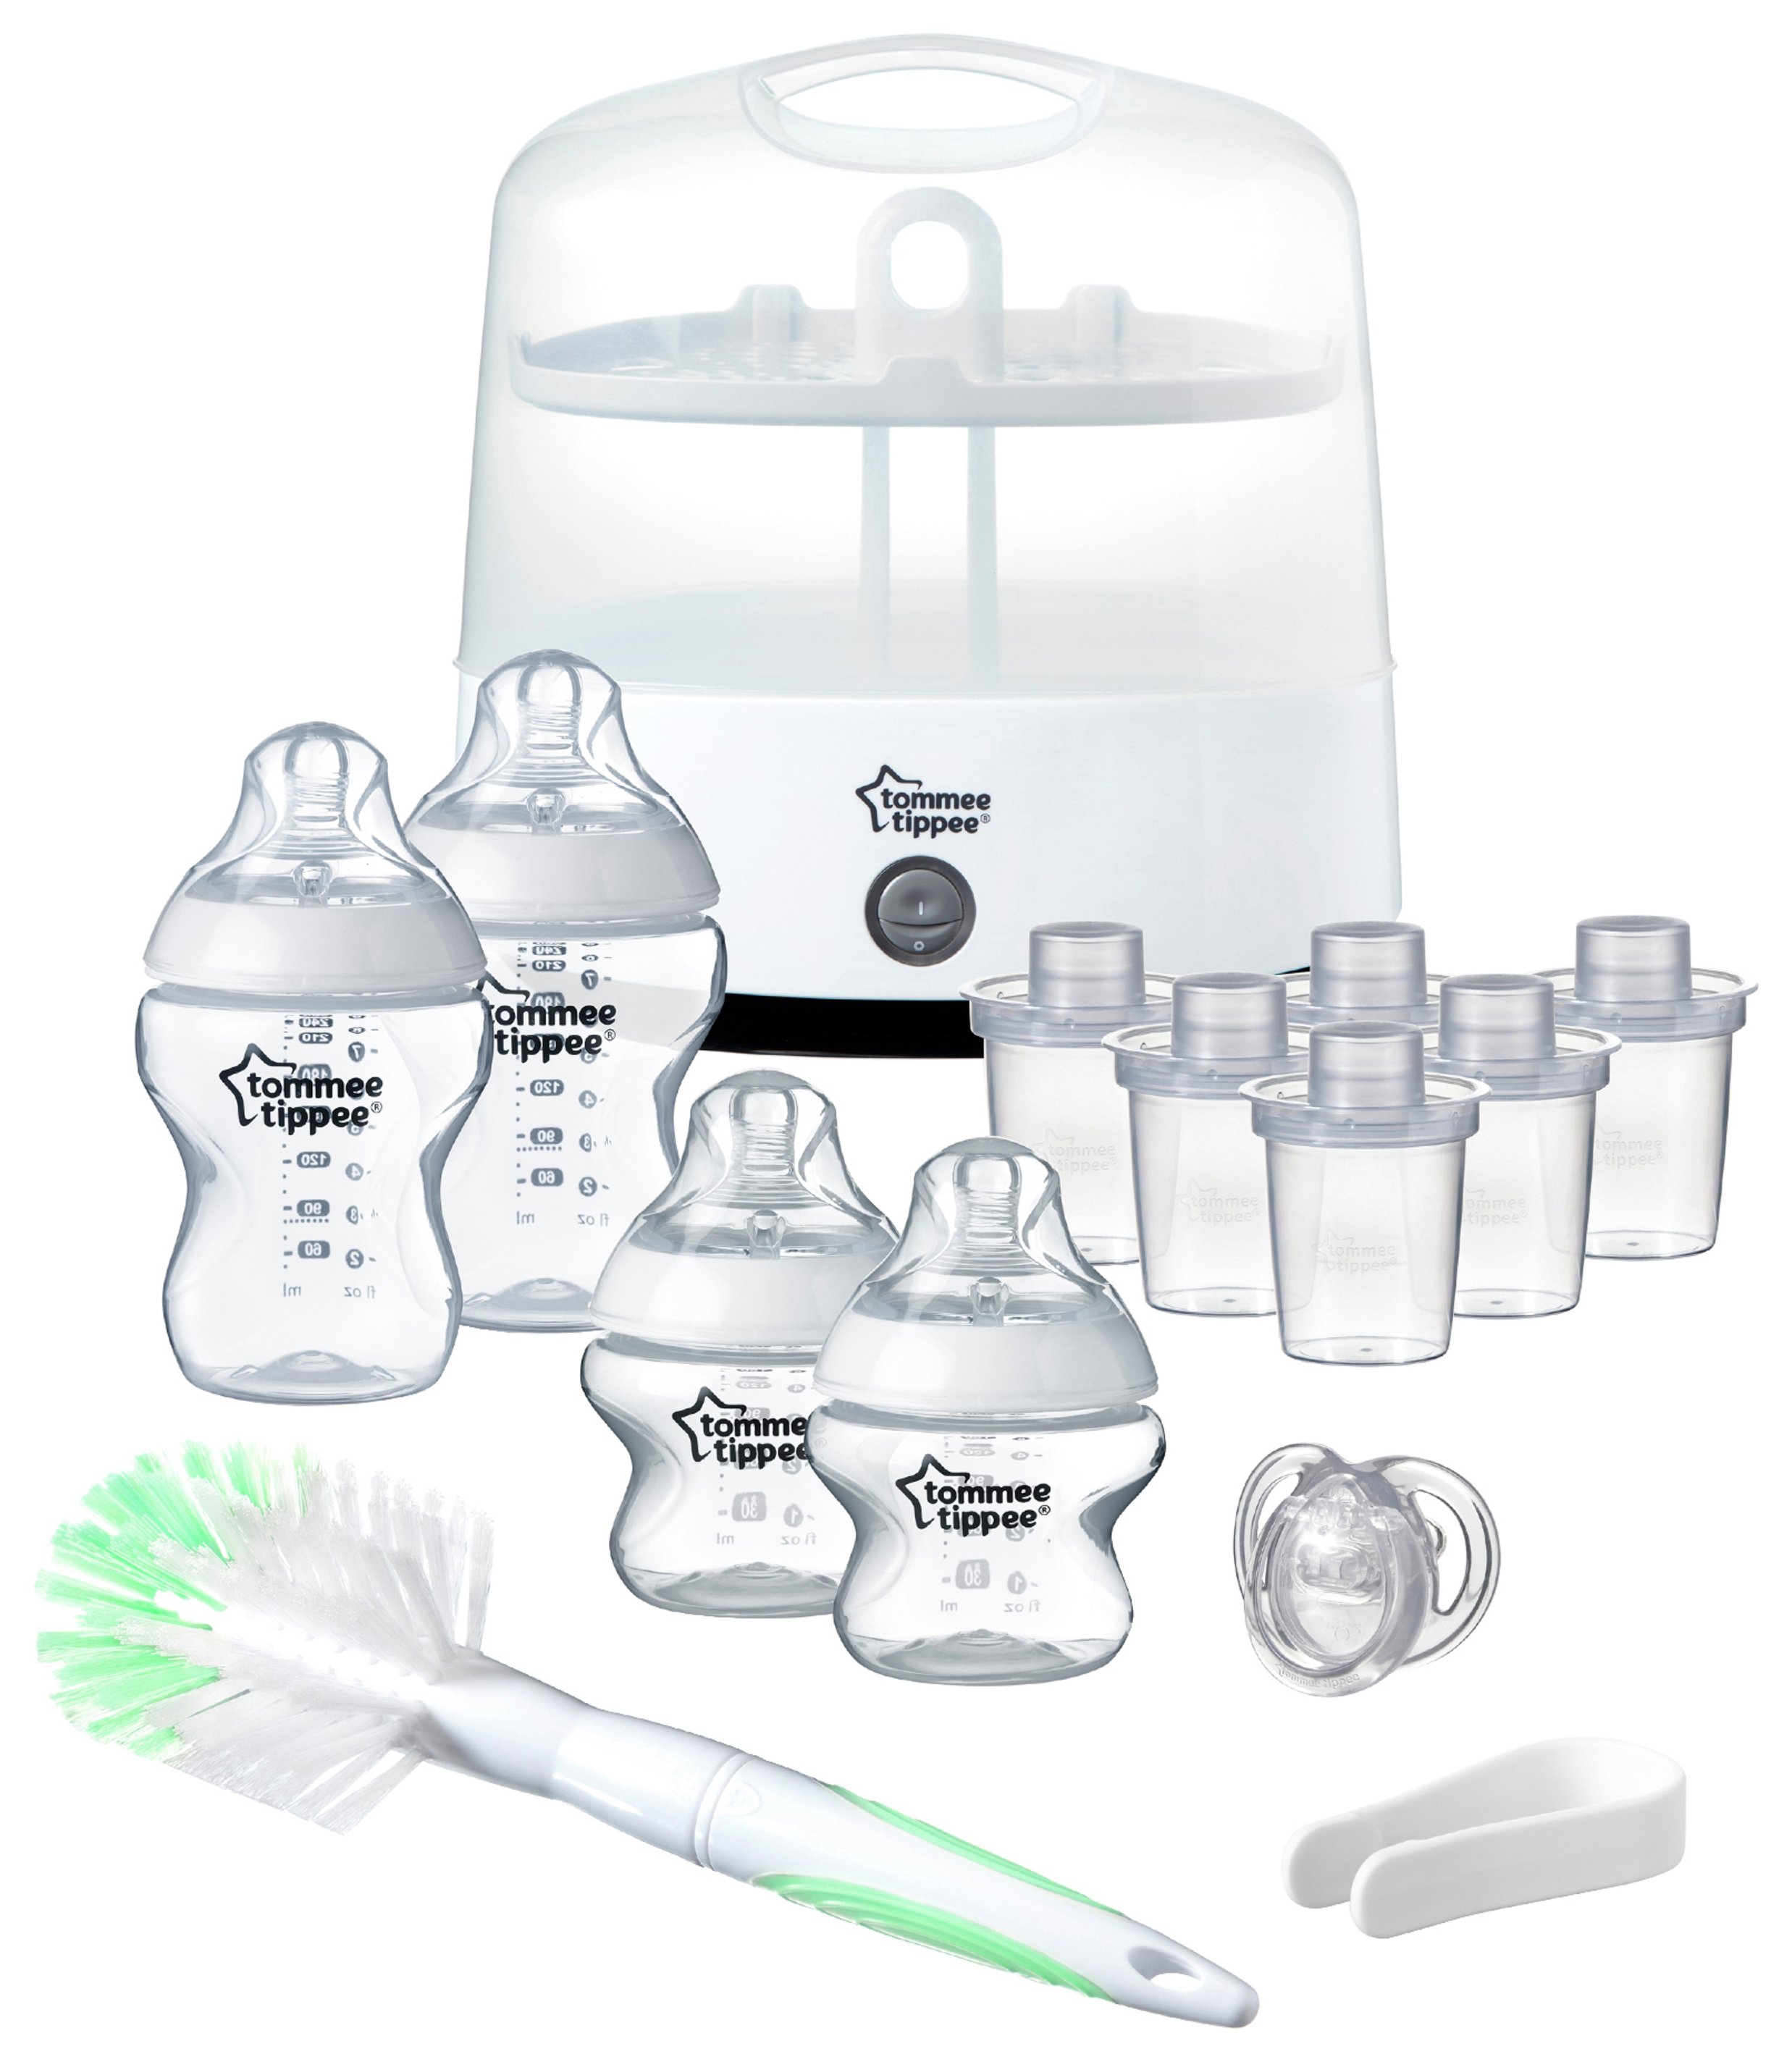 Tommee Tippee - Closer to Nature Electric Steriliser Kit Review